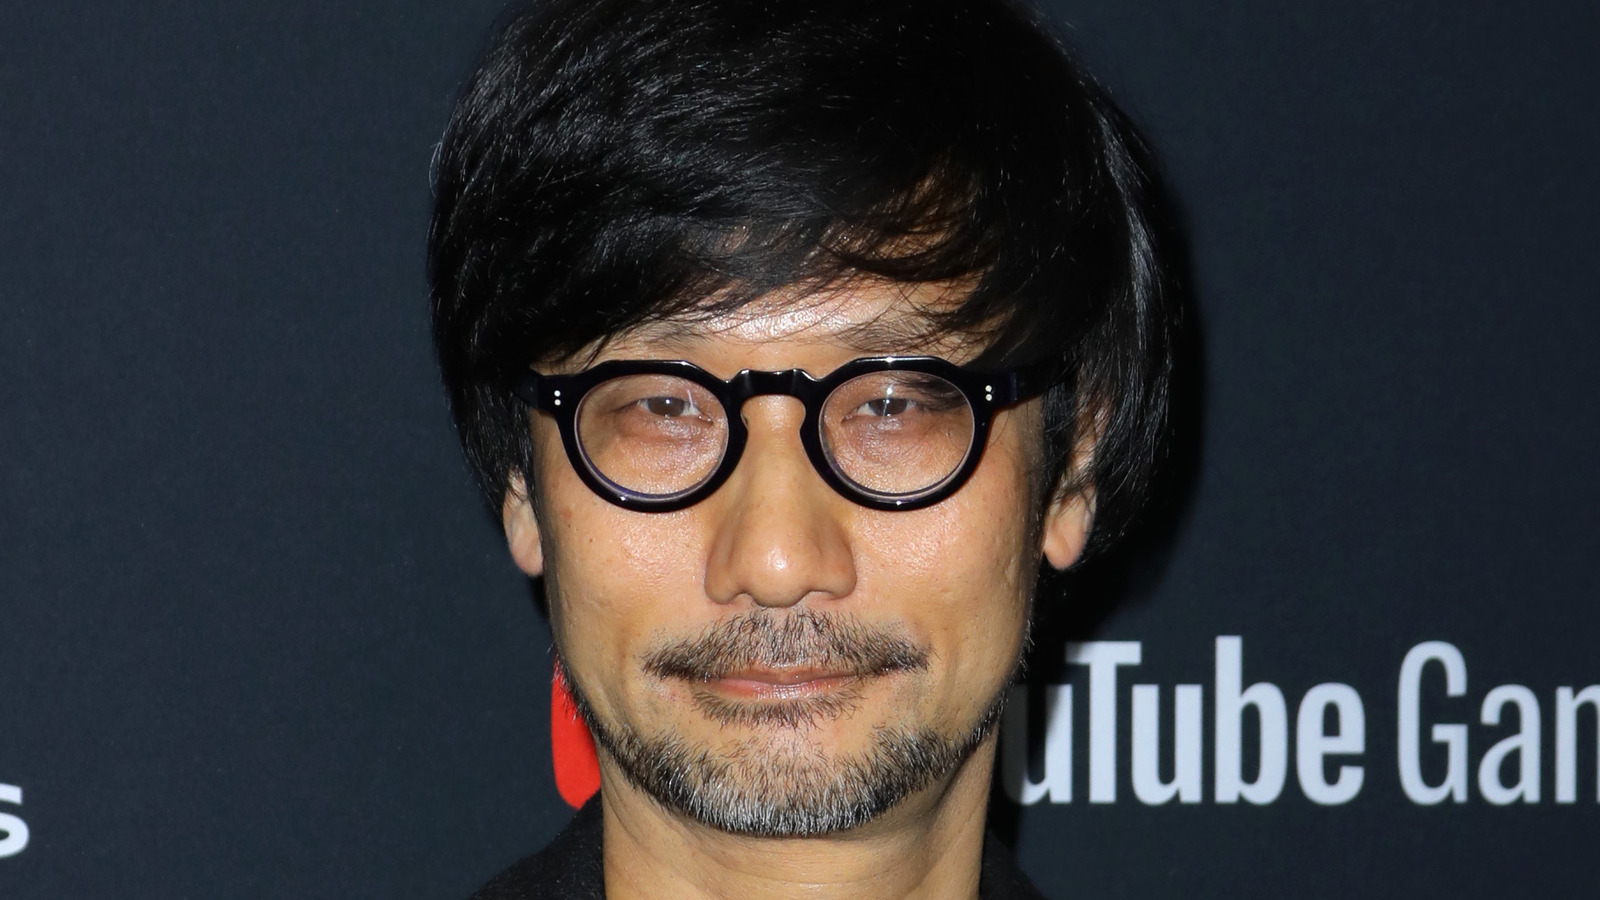 Hideo Kojima Announces New Game OD in Partnership With Xbox and